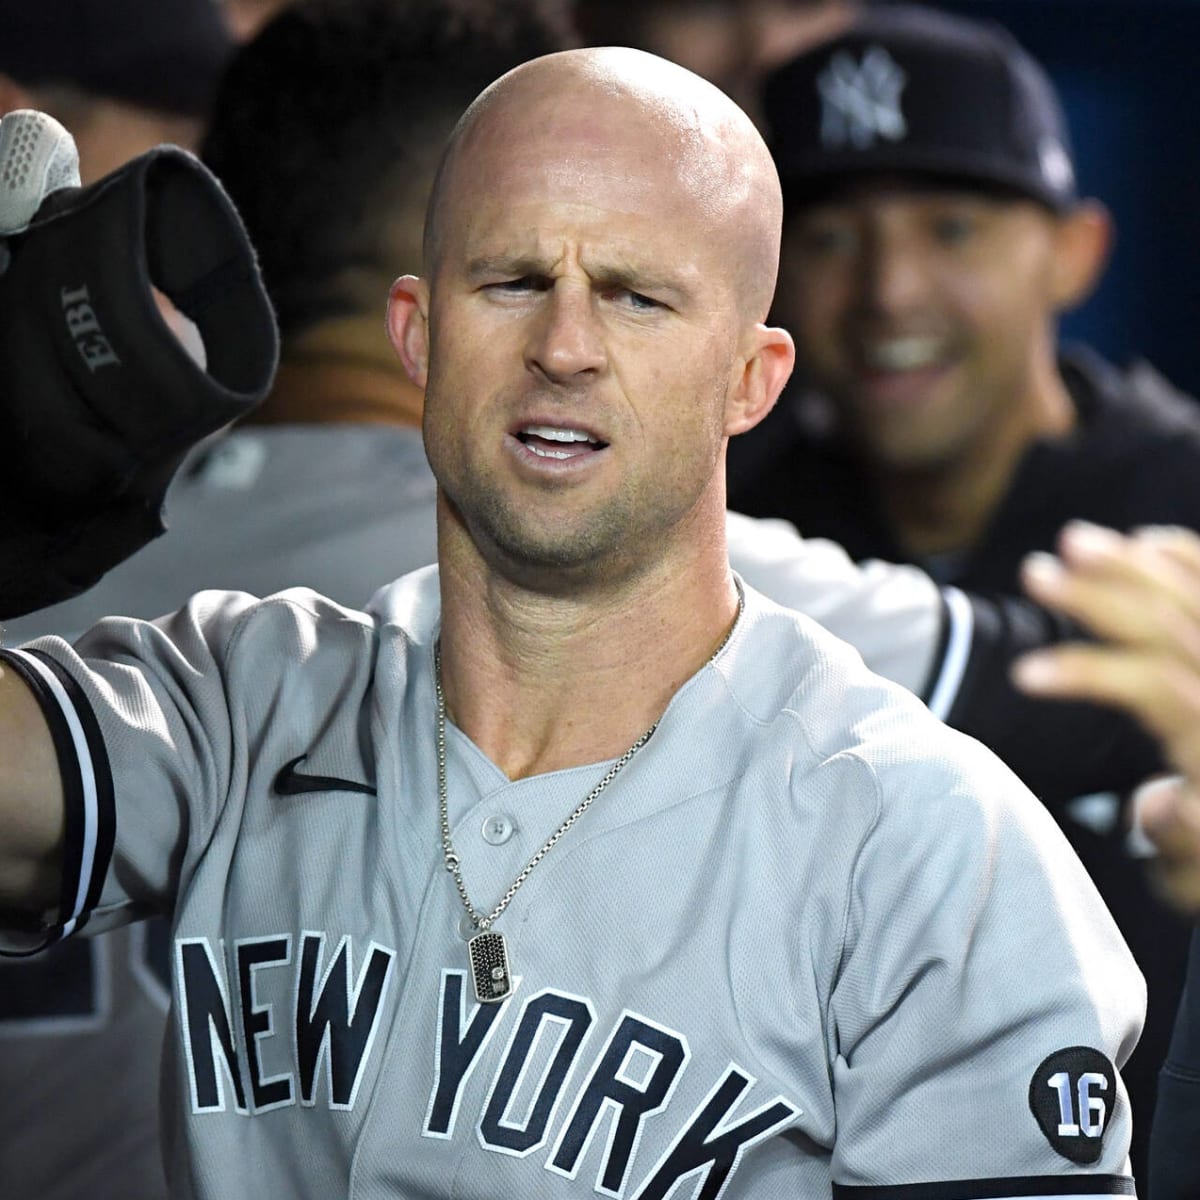 Brett Gardner says obsessed fan has 'harassed and menaced' his family